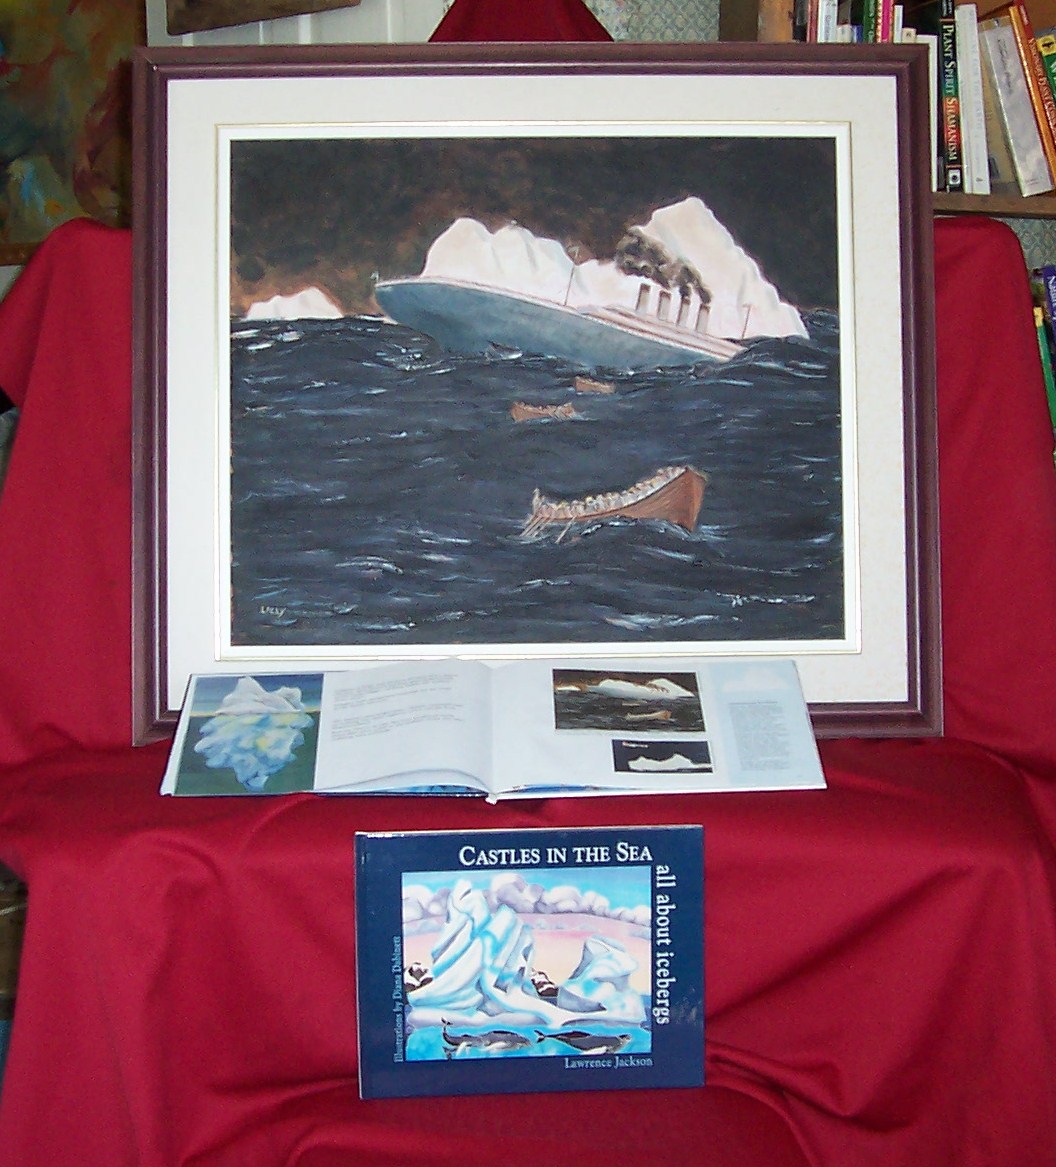 Sinking of the Titanic - Oil Painting, 1997.